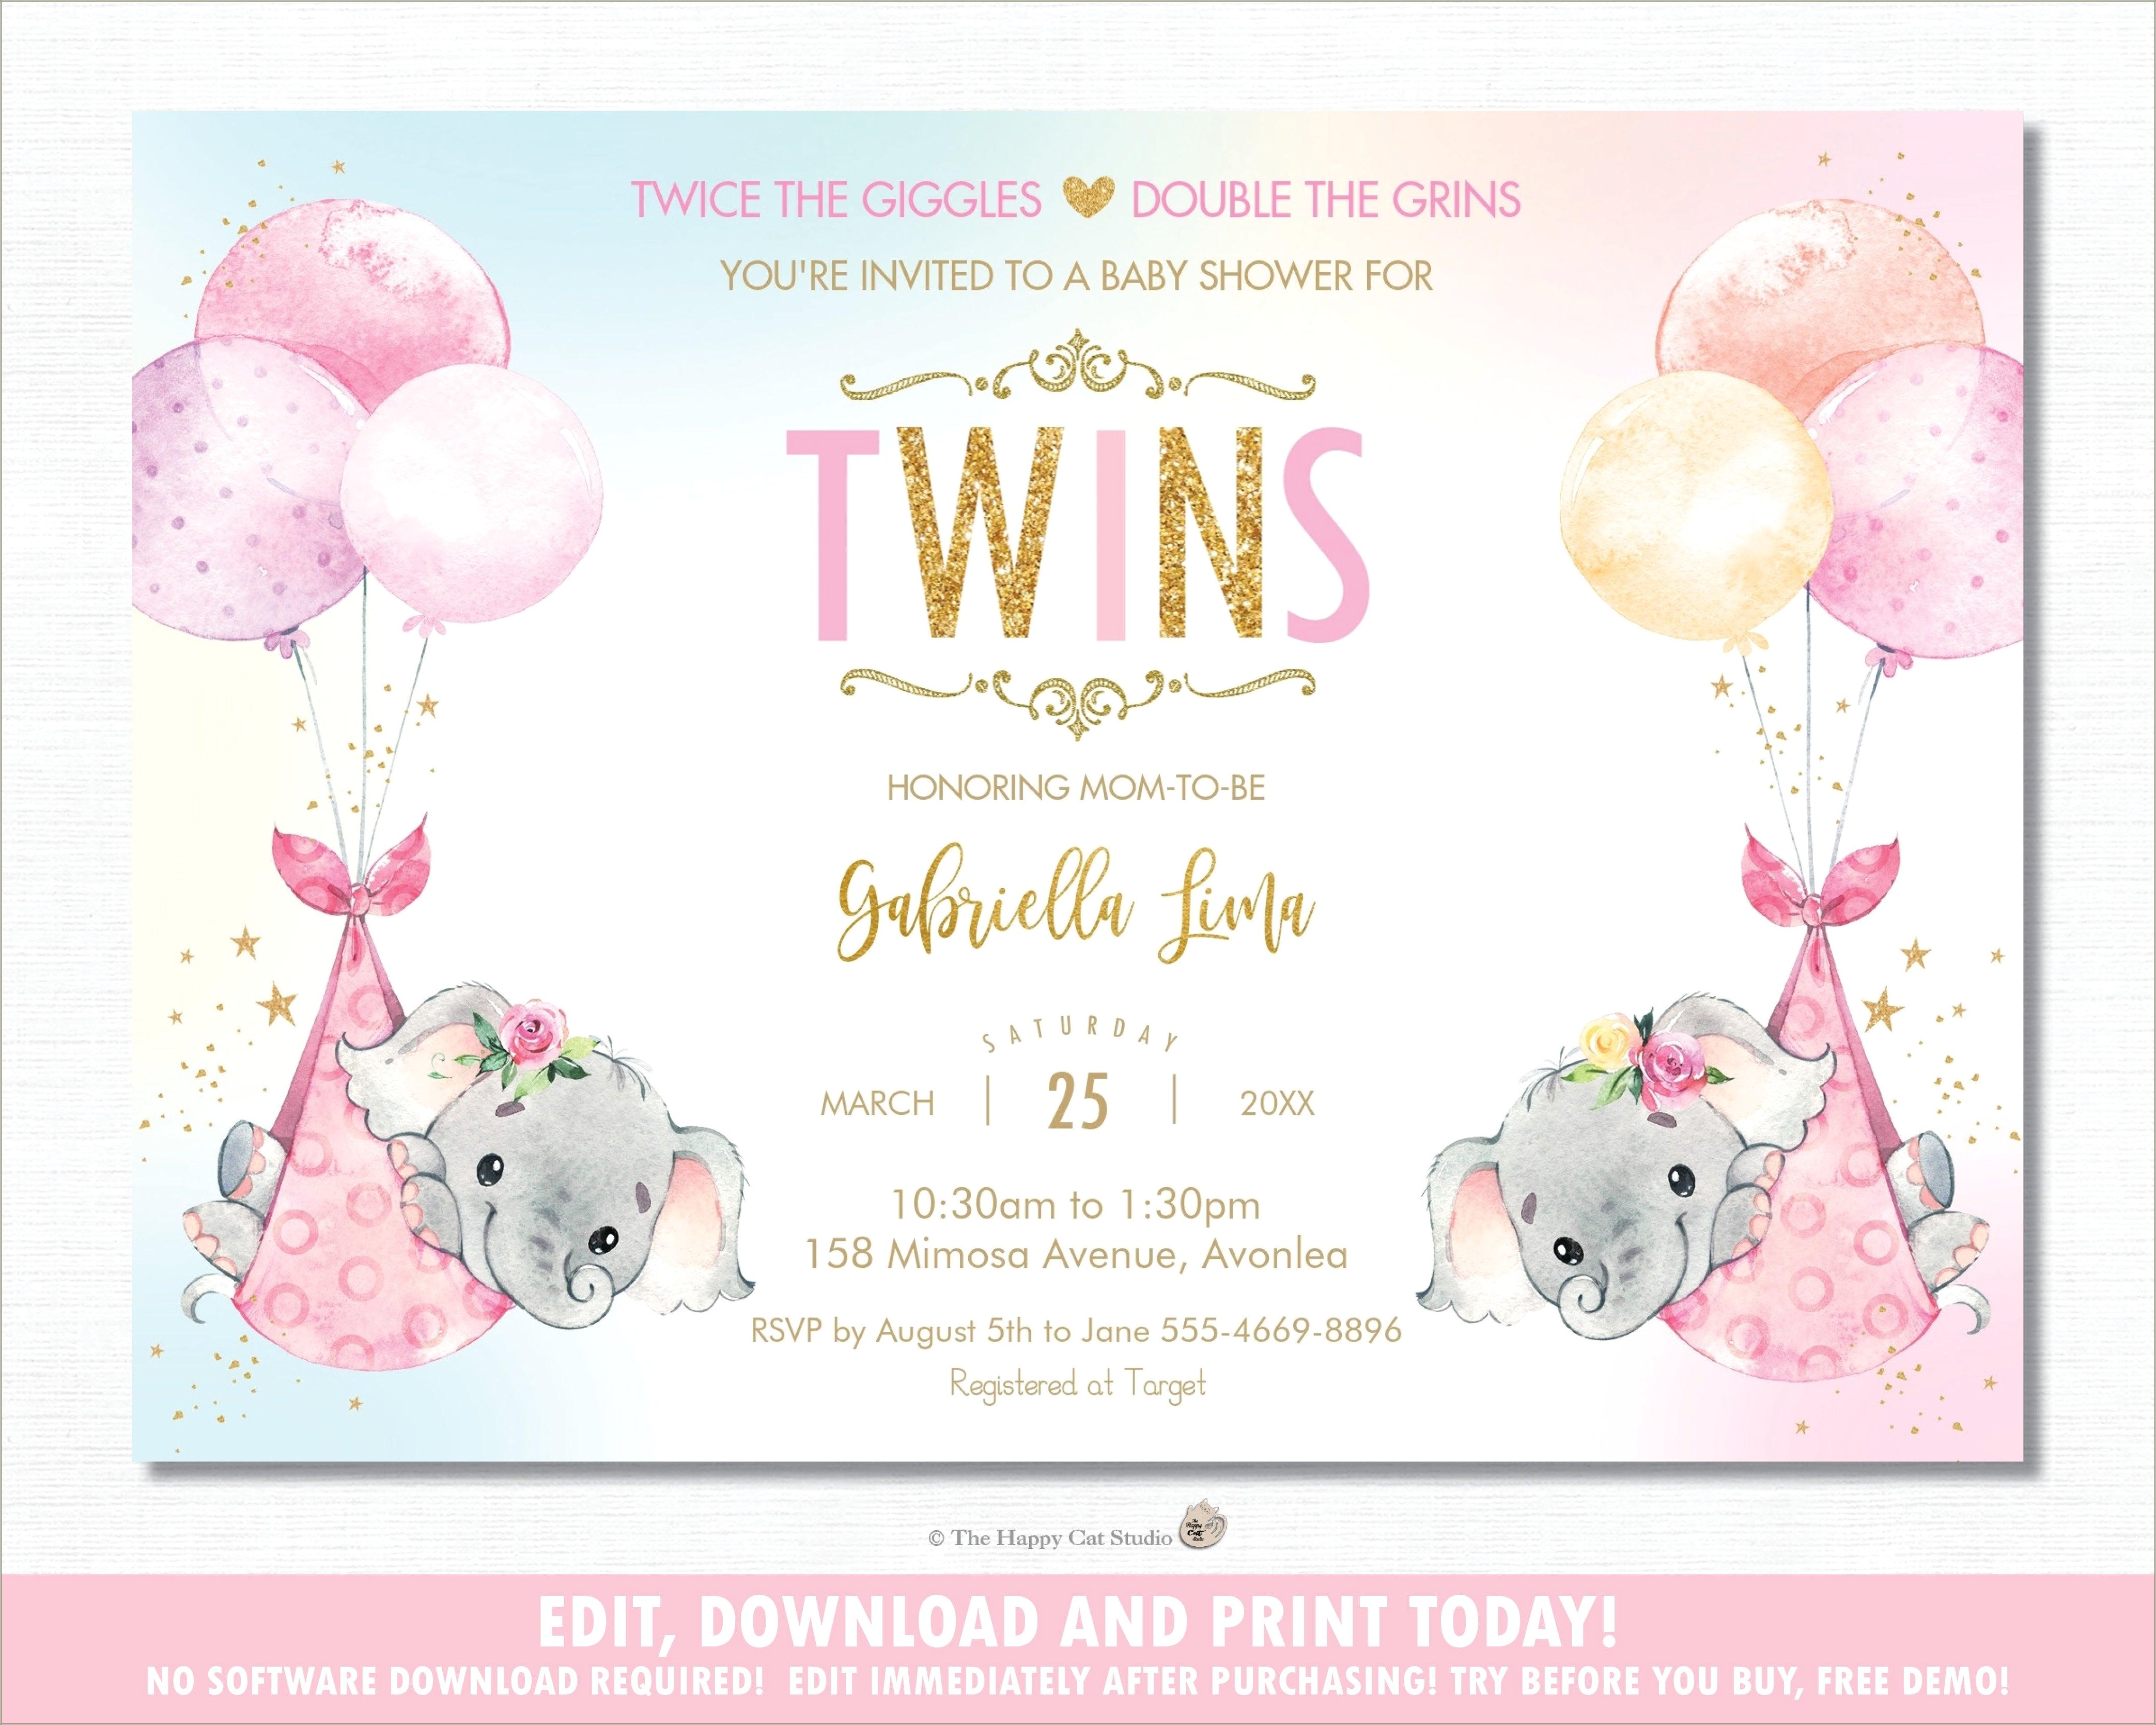 Free Online Baby Shower Invitations Templates Pdf